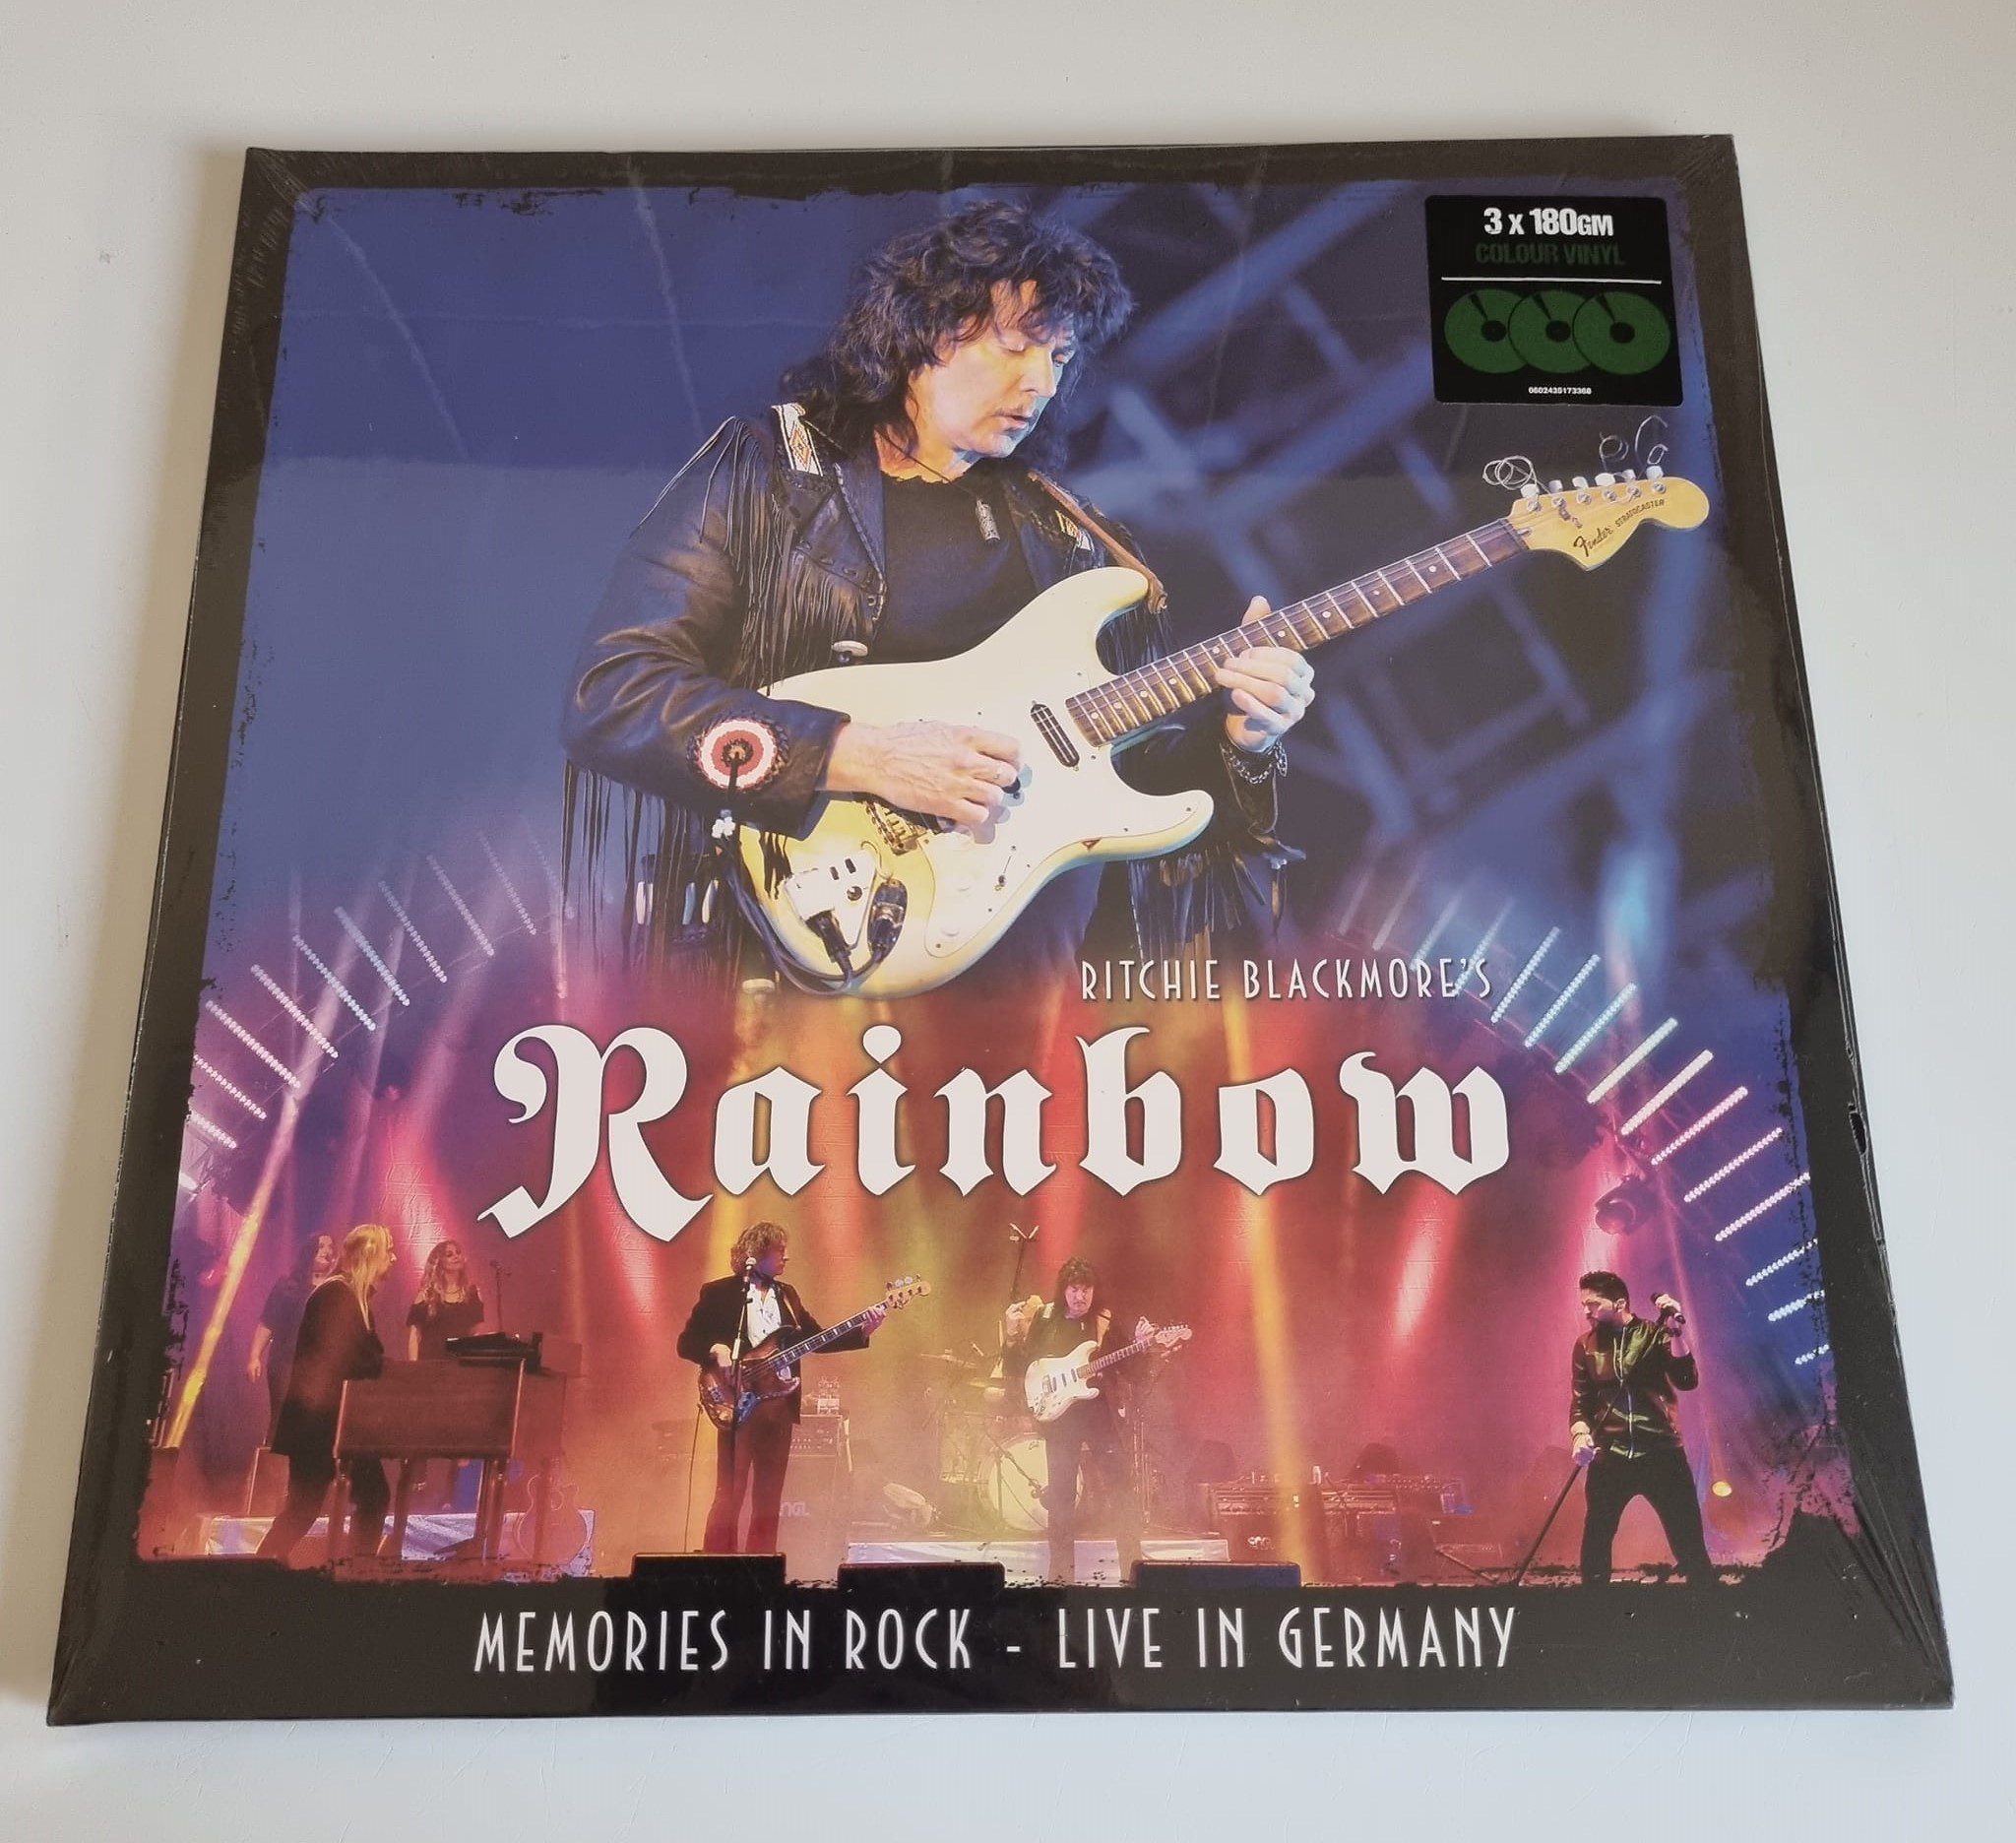 Buy this rare Rainbow record by clicking here